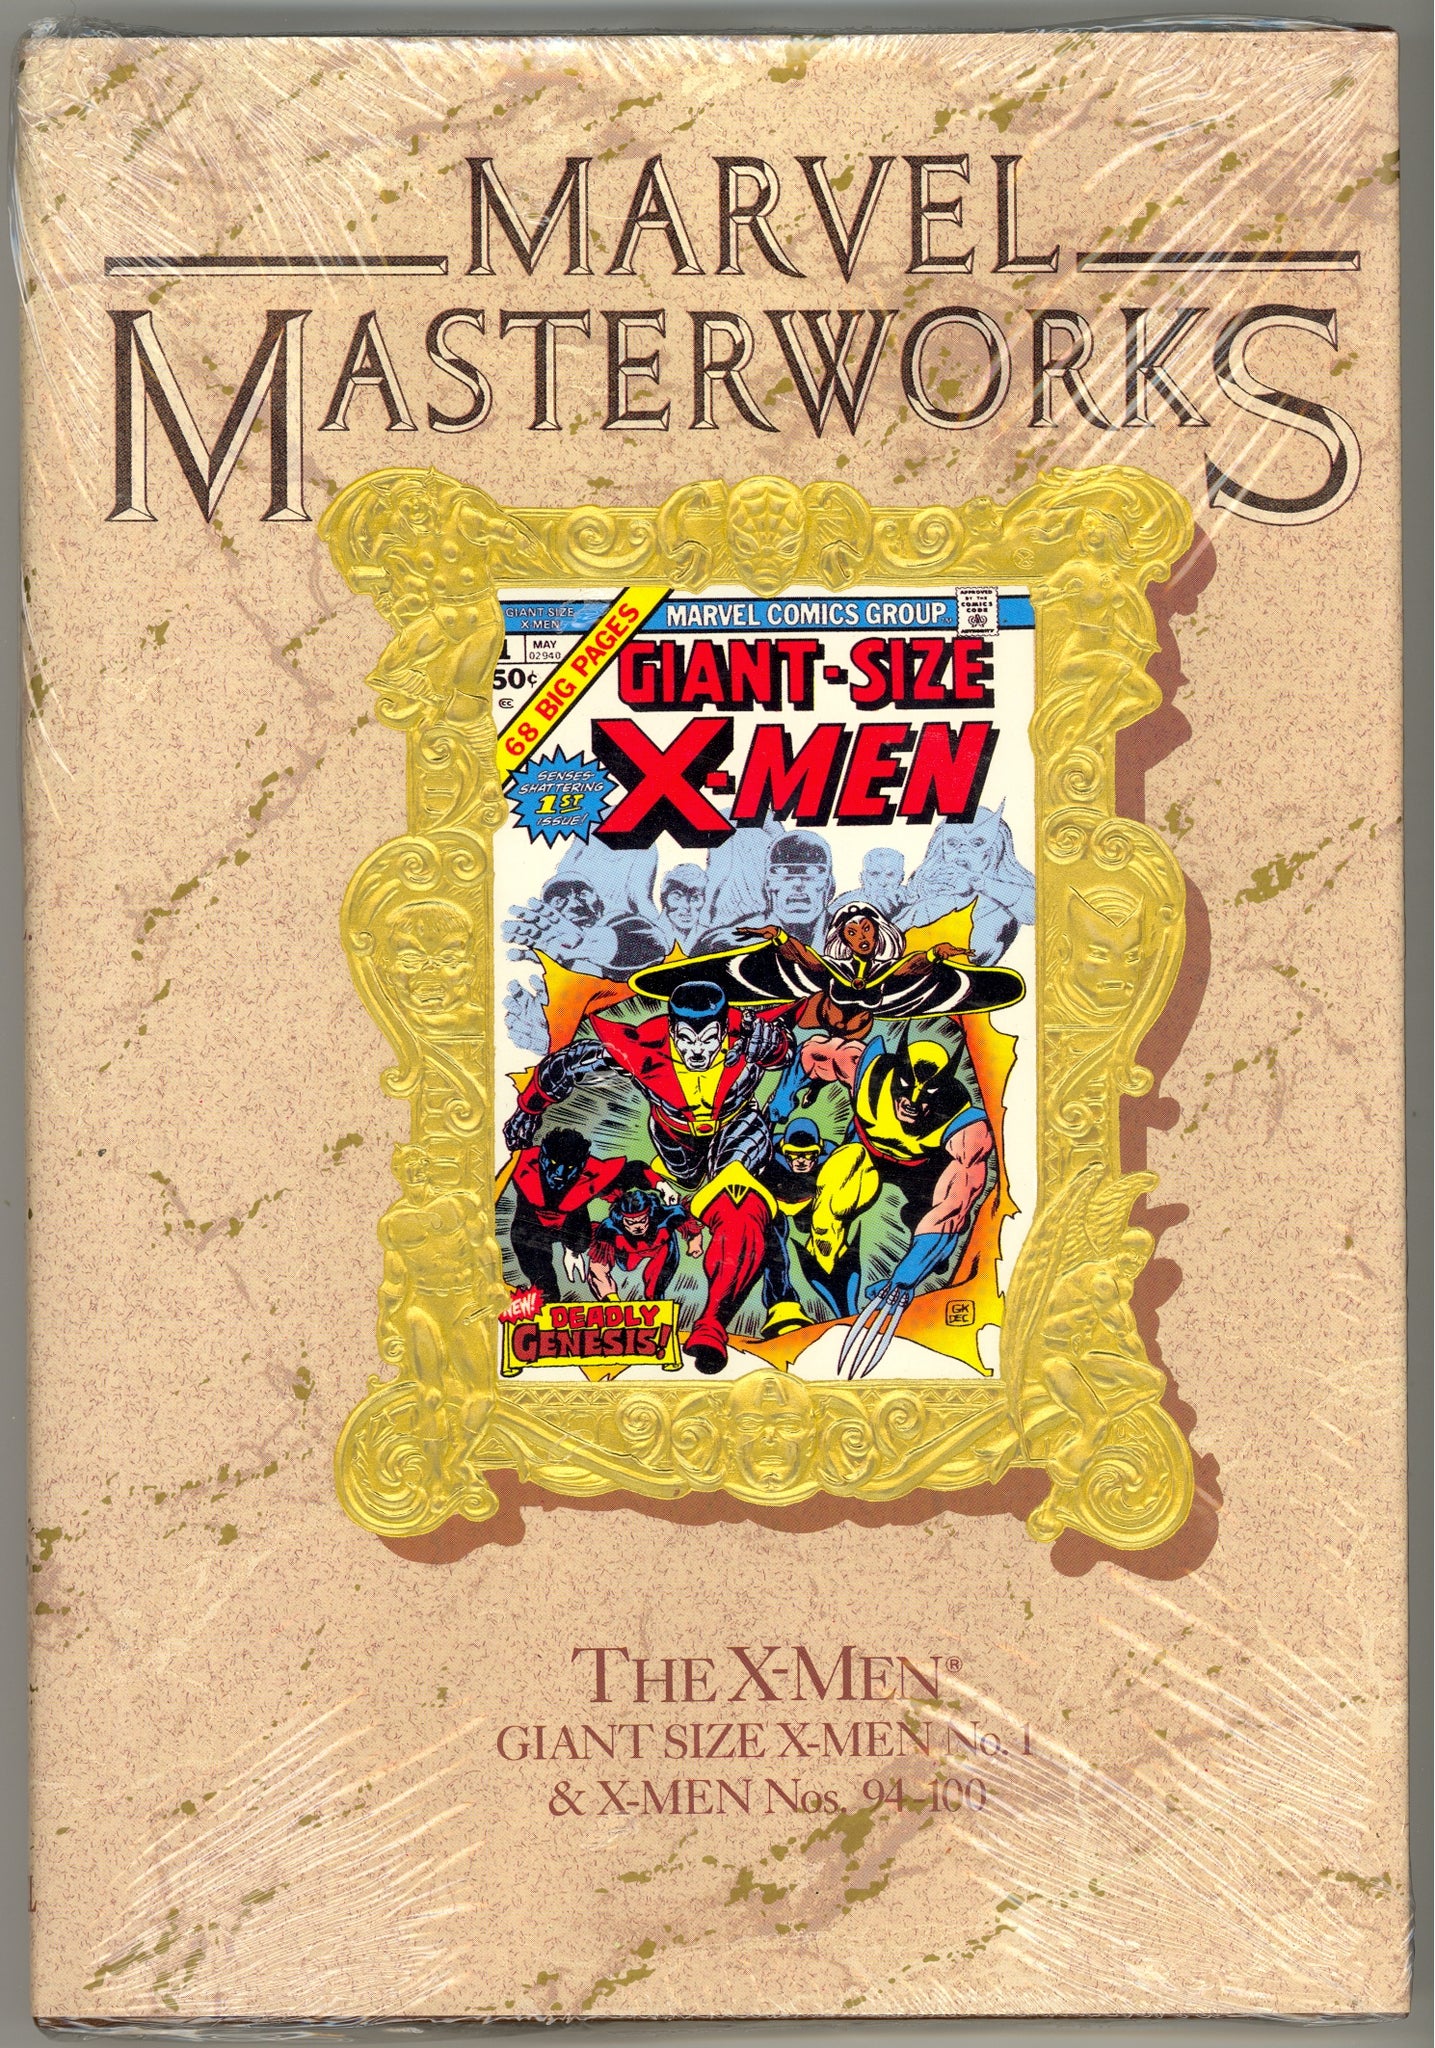 Marvel Masterworks volume 11 X-Men issues #94-100 and Giant Size #1, 1st printing